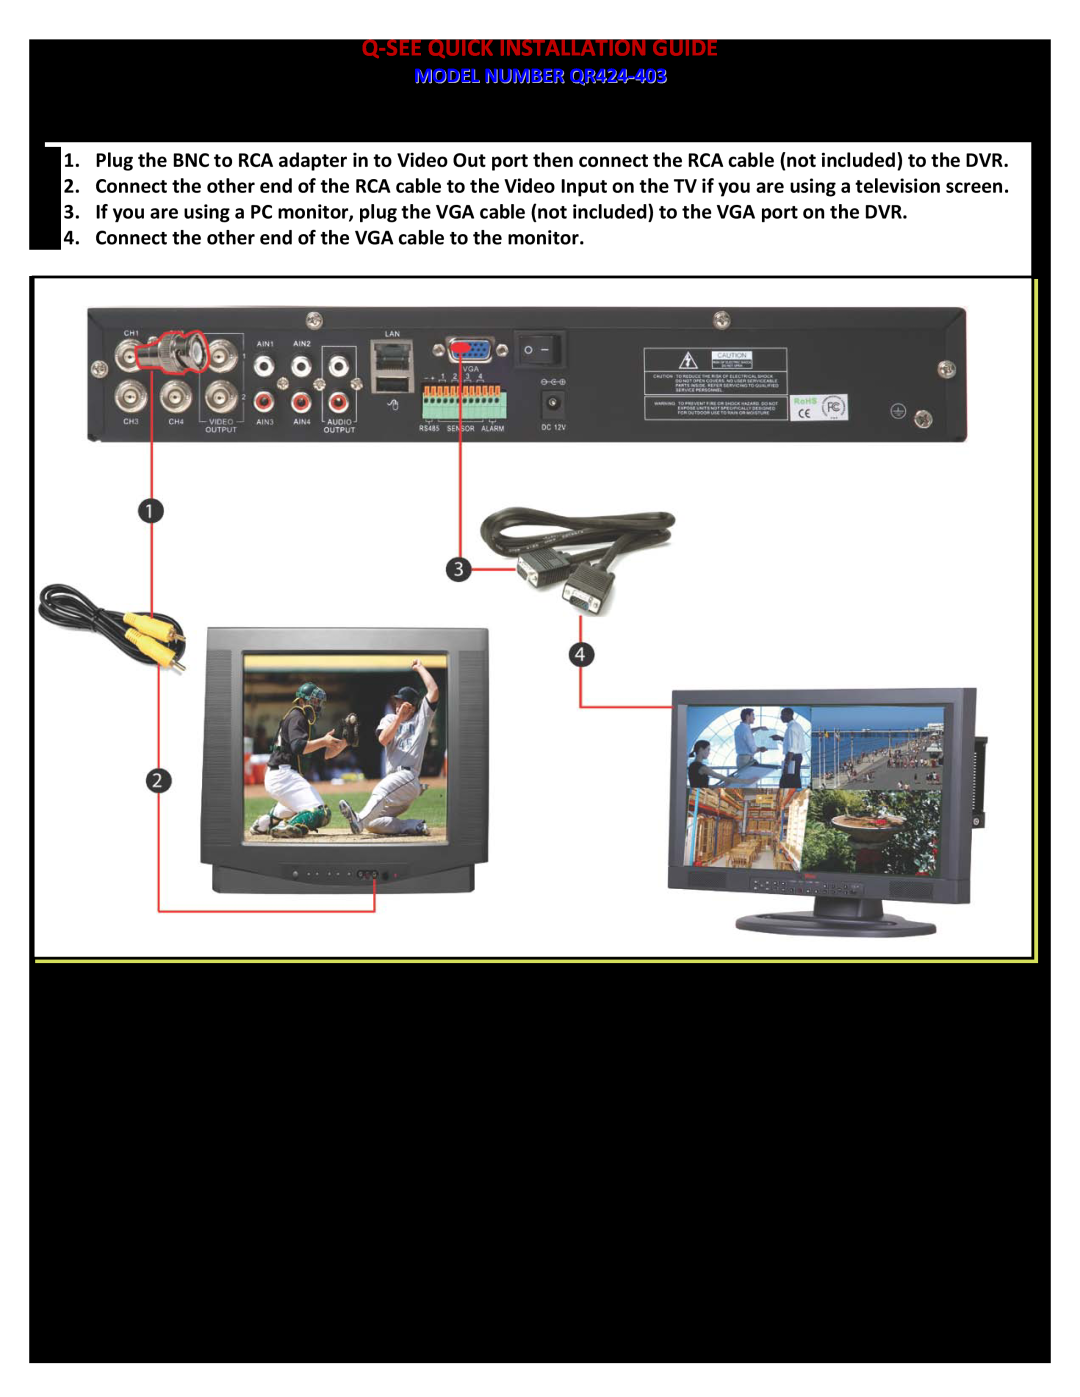 Q-See manual PART 3 - CONNECTING THE DVR TO YOUR TV, P a g e, Q-Seequick Installation Guide, MODEL NUMBER QR424-403 